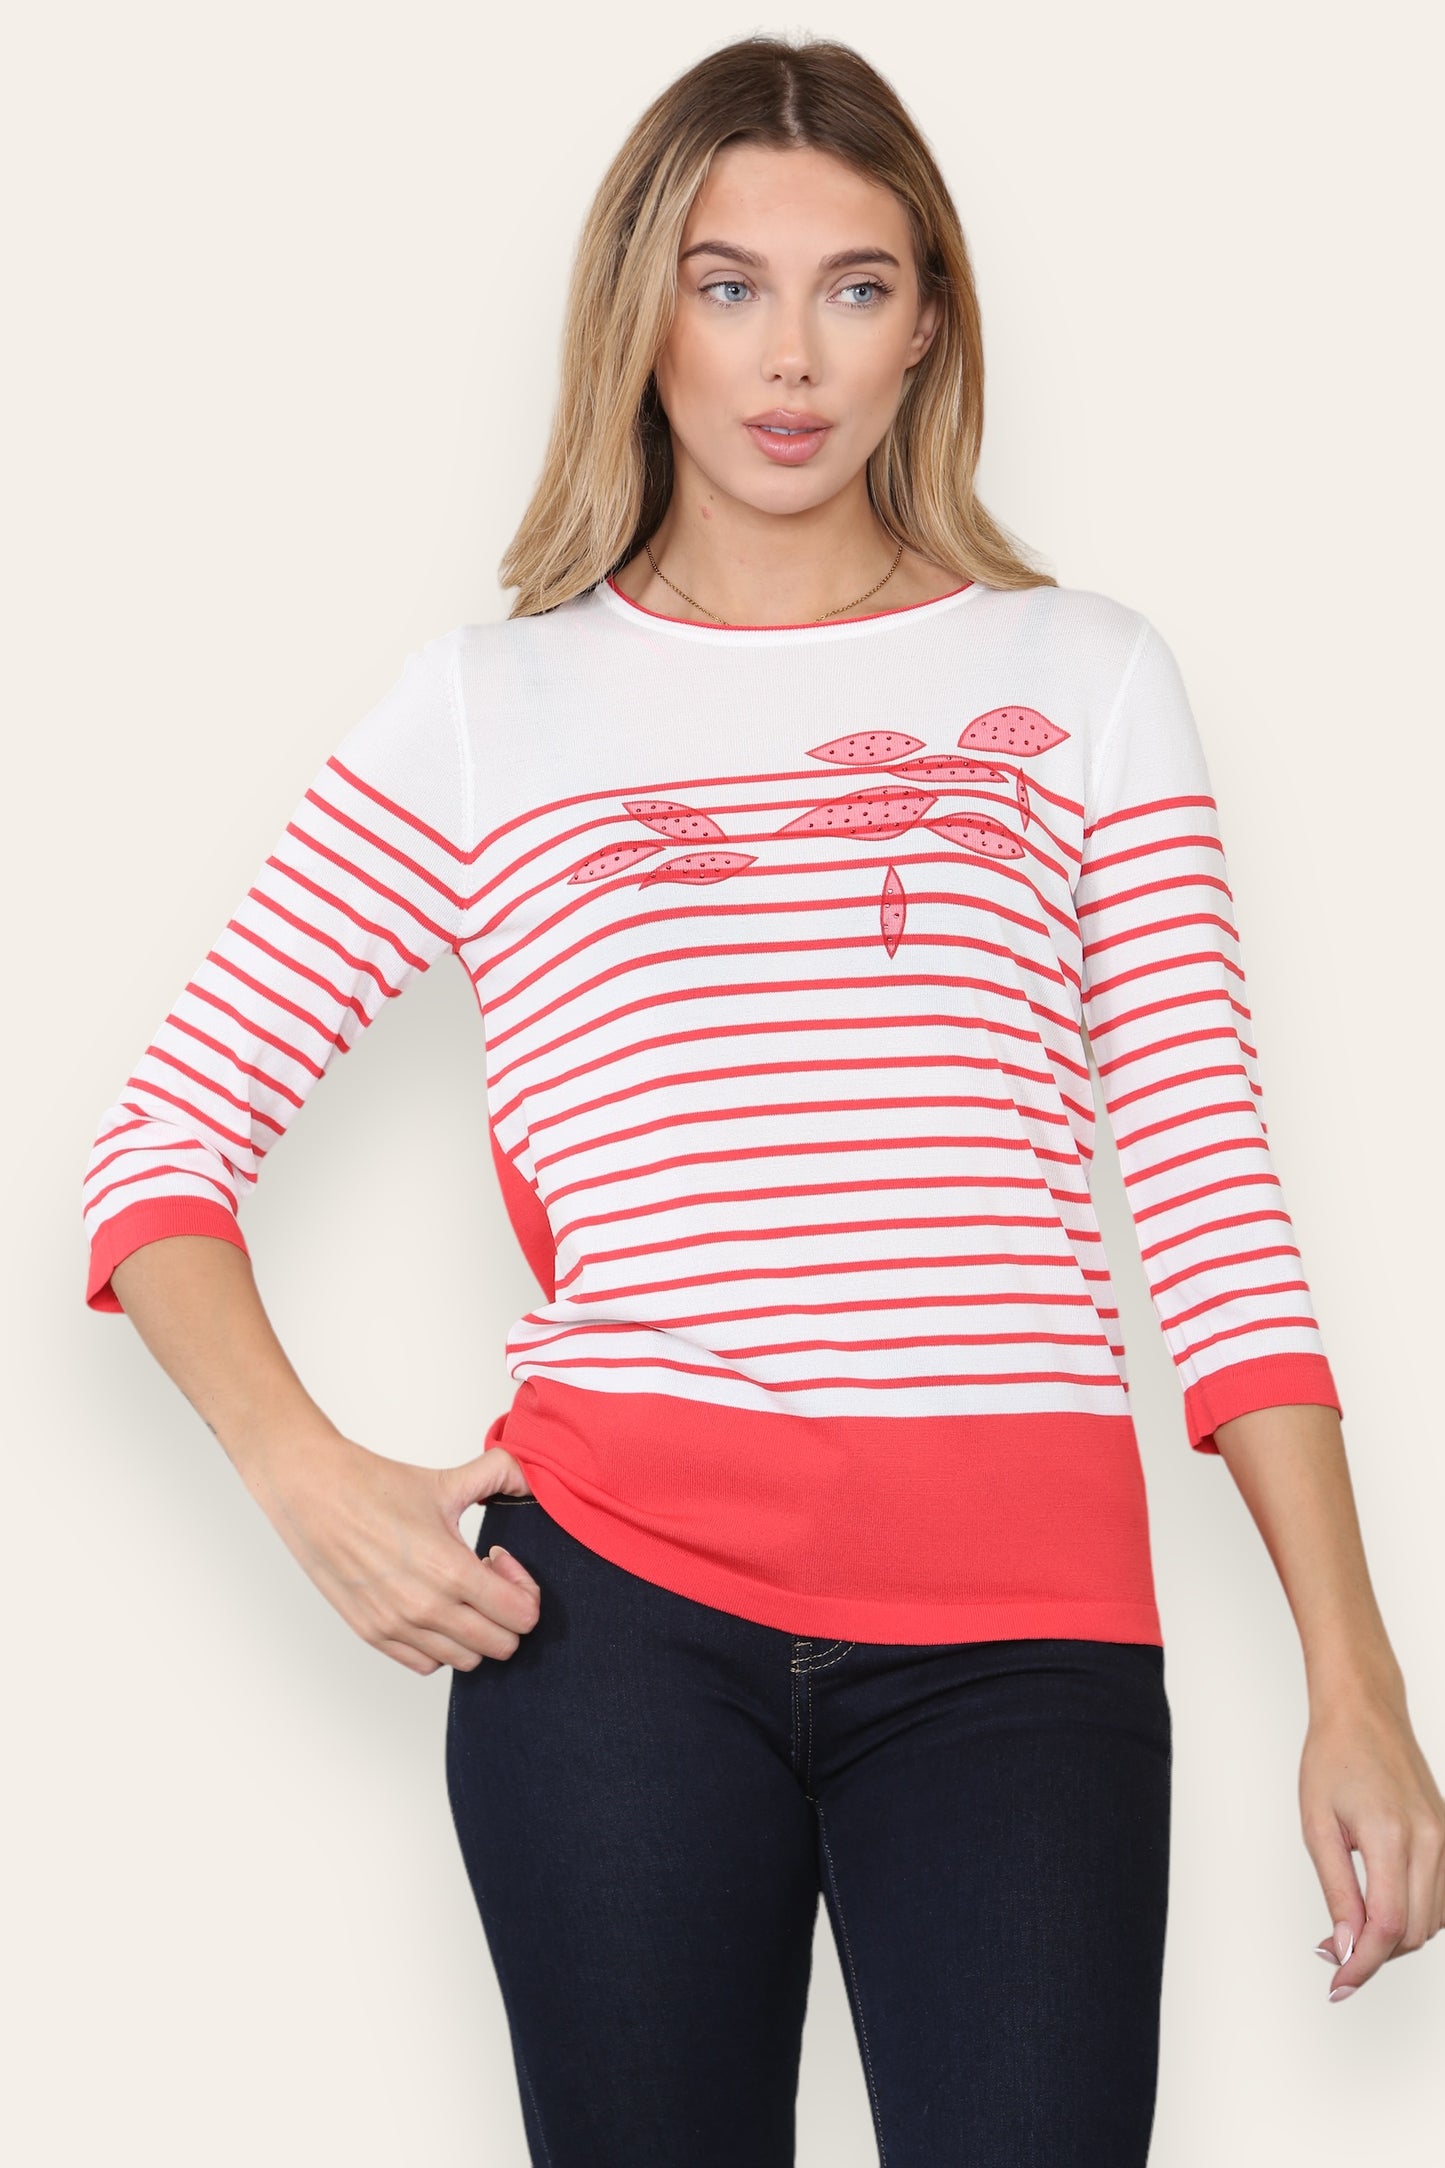 Striped Floral Print 3/4 Sleeve Top